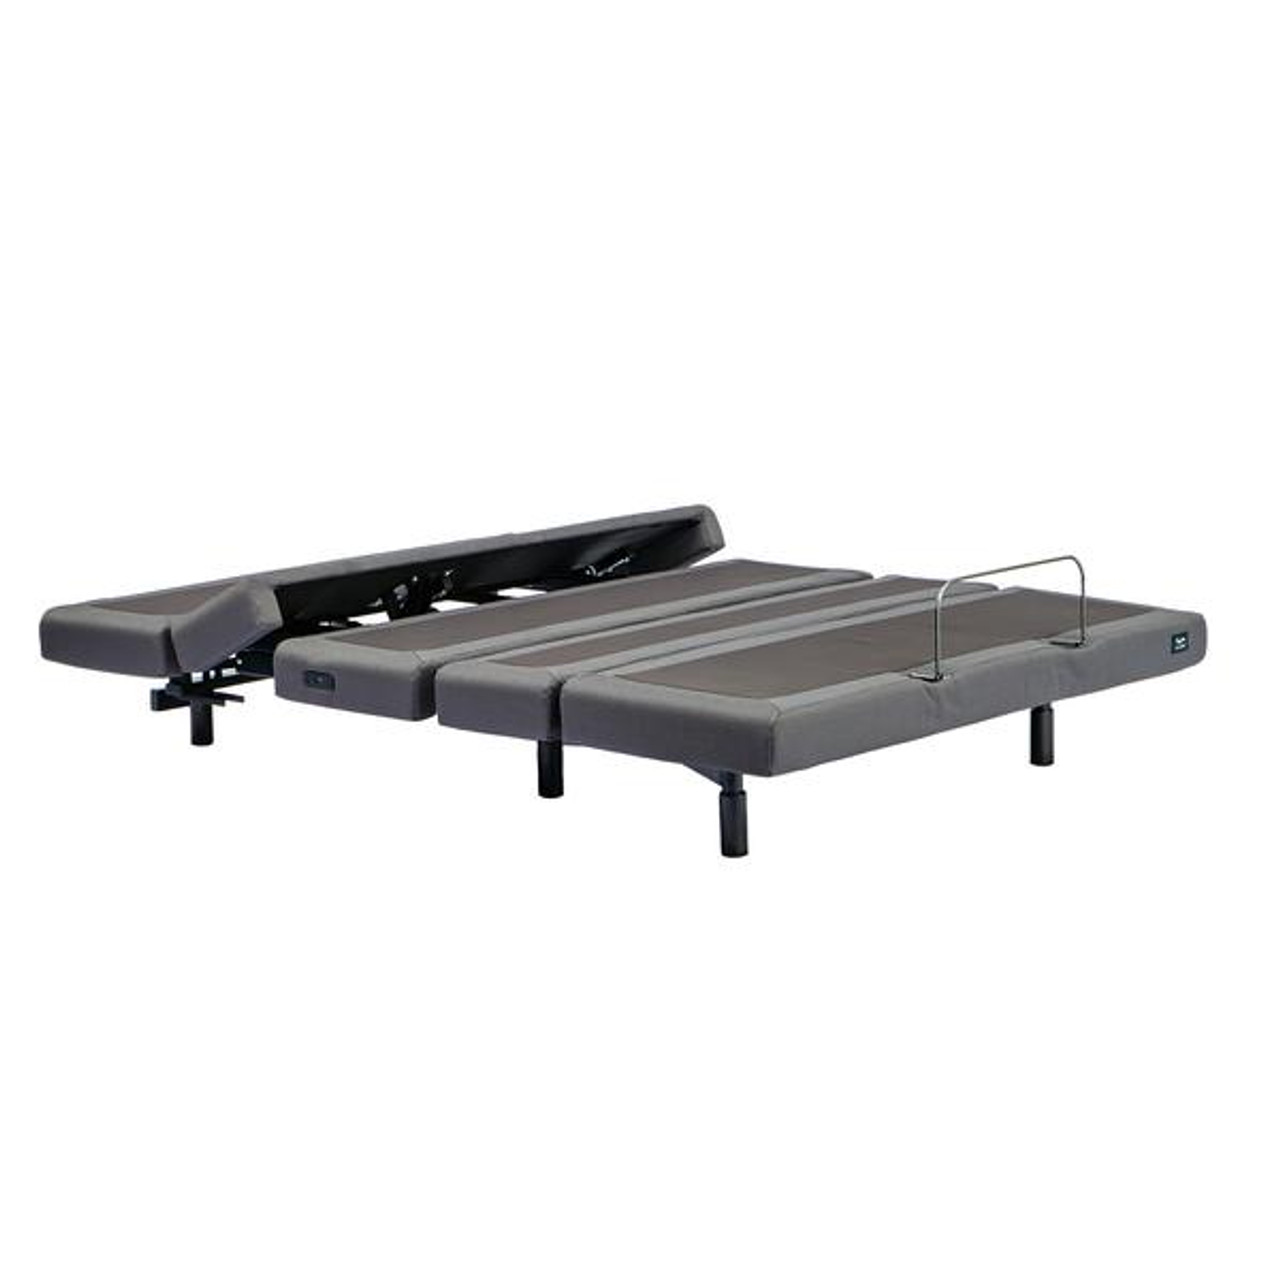 Rize Adjustable Bed Rize Adjustable Bed Sale - In Stock Contemporary and Remedy Bases